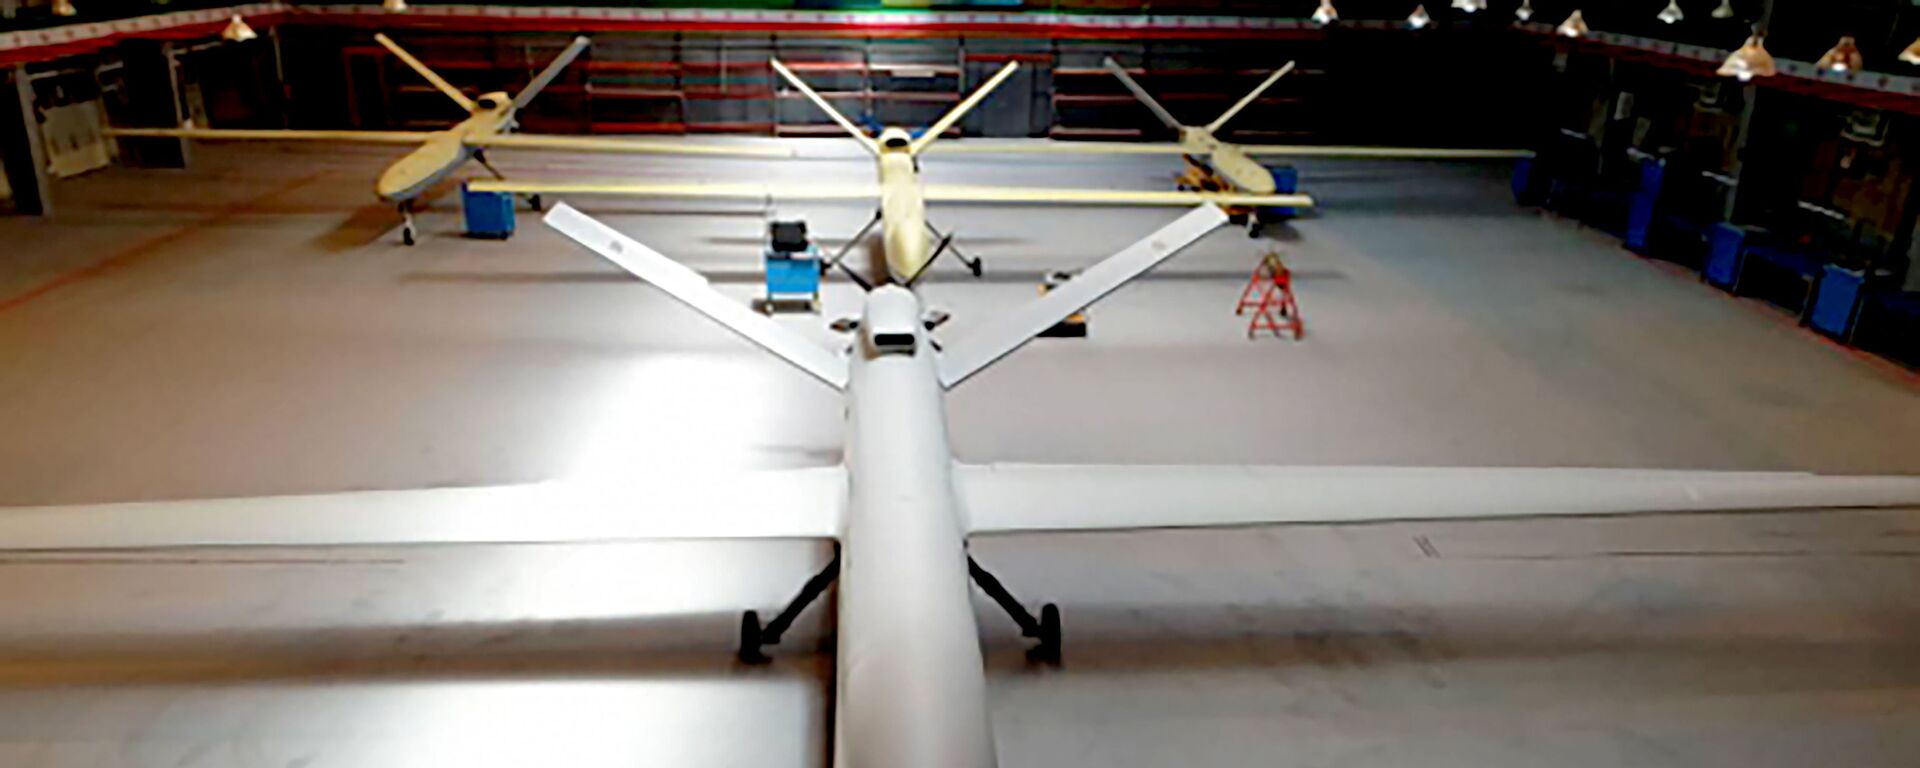 In this photo released on Saturday, May 21, 2021, by Sepahnews, the website of the Iranian Revolutionary Guard, a new Gaza drone is displayed in an undisclosed location in Iran. (Sepahnews via AP) - Sputnik International, 1920, 21.05.2021